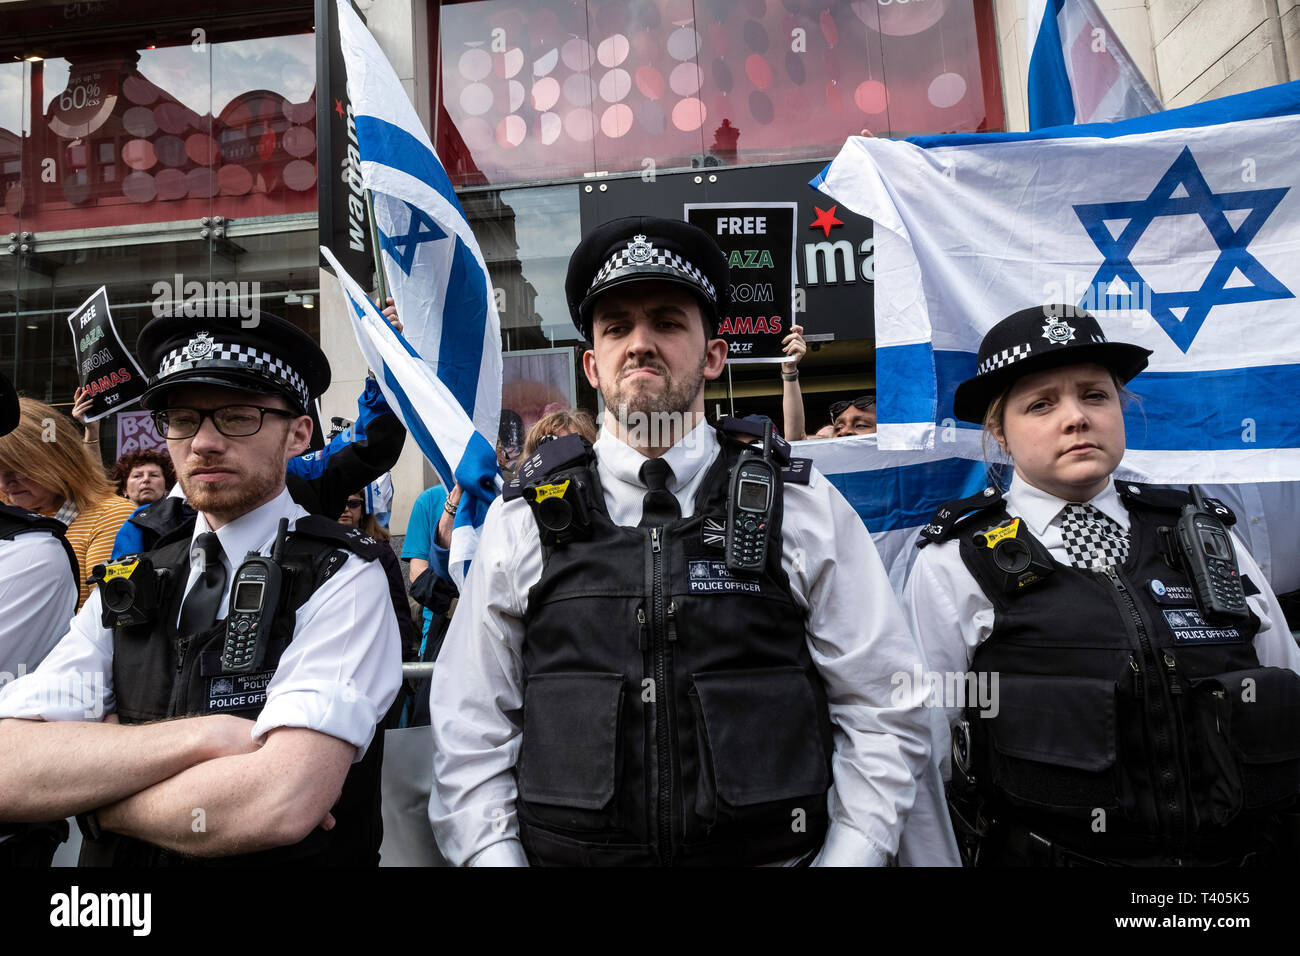 Israeli group being protected behind barrier outside the Israeli Embassy during a rally by Palestinians in London. Exist,Resist, Return. A global call for solidarity on the 1st anniversary of the start of the Great Return March. Stock Photo